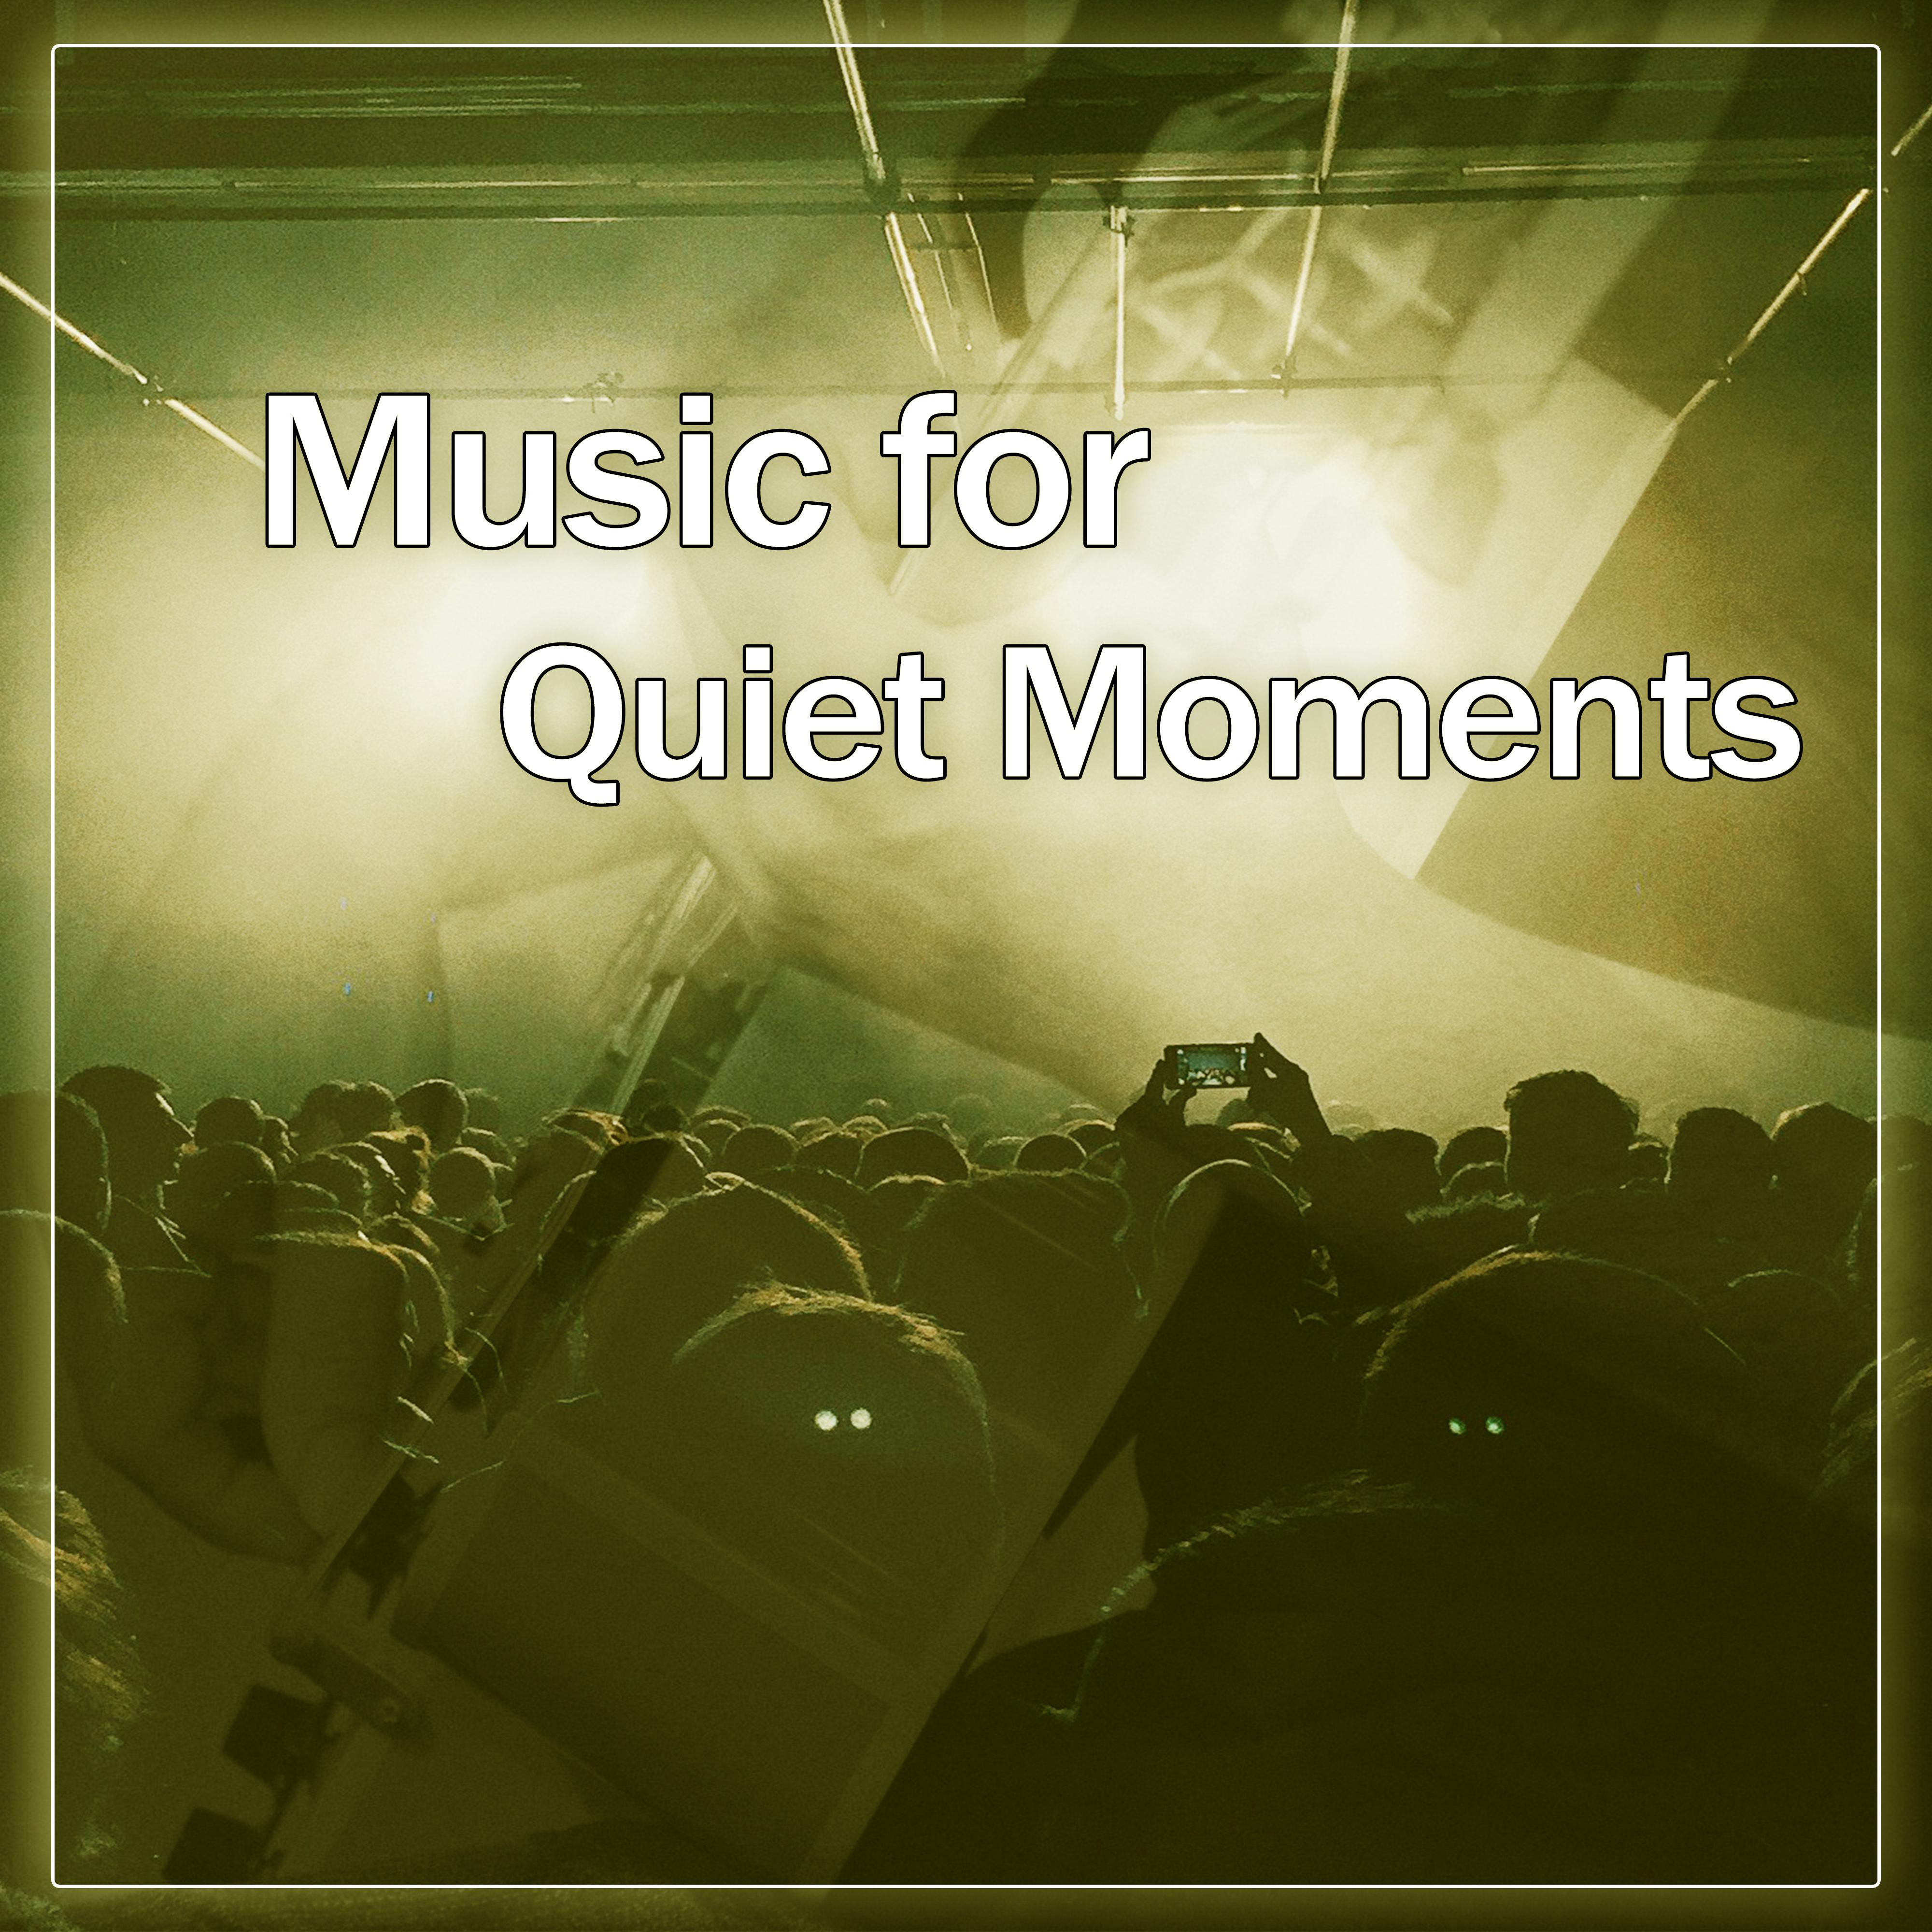 Music for Quiet Moments - Night Dream Music, **** Piano Songs, Soft Jazz Memories, Smooth Jazz Lounge